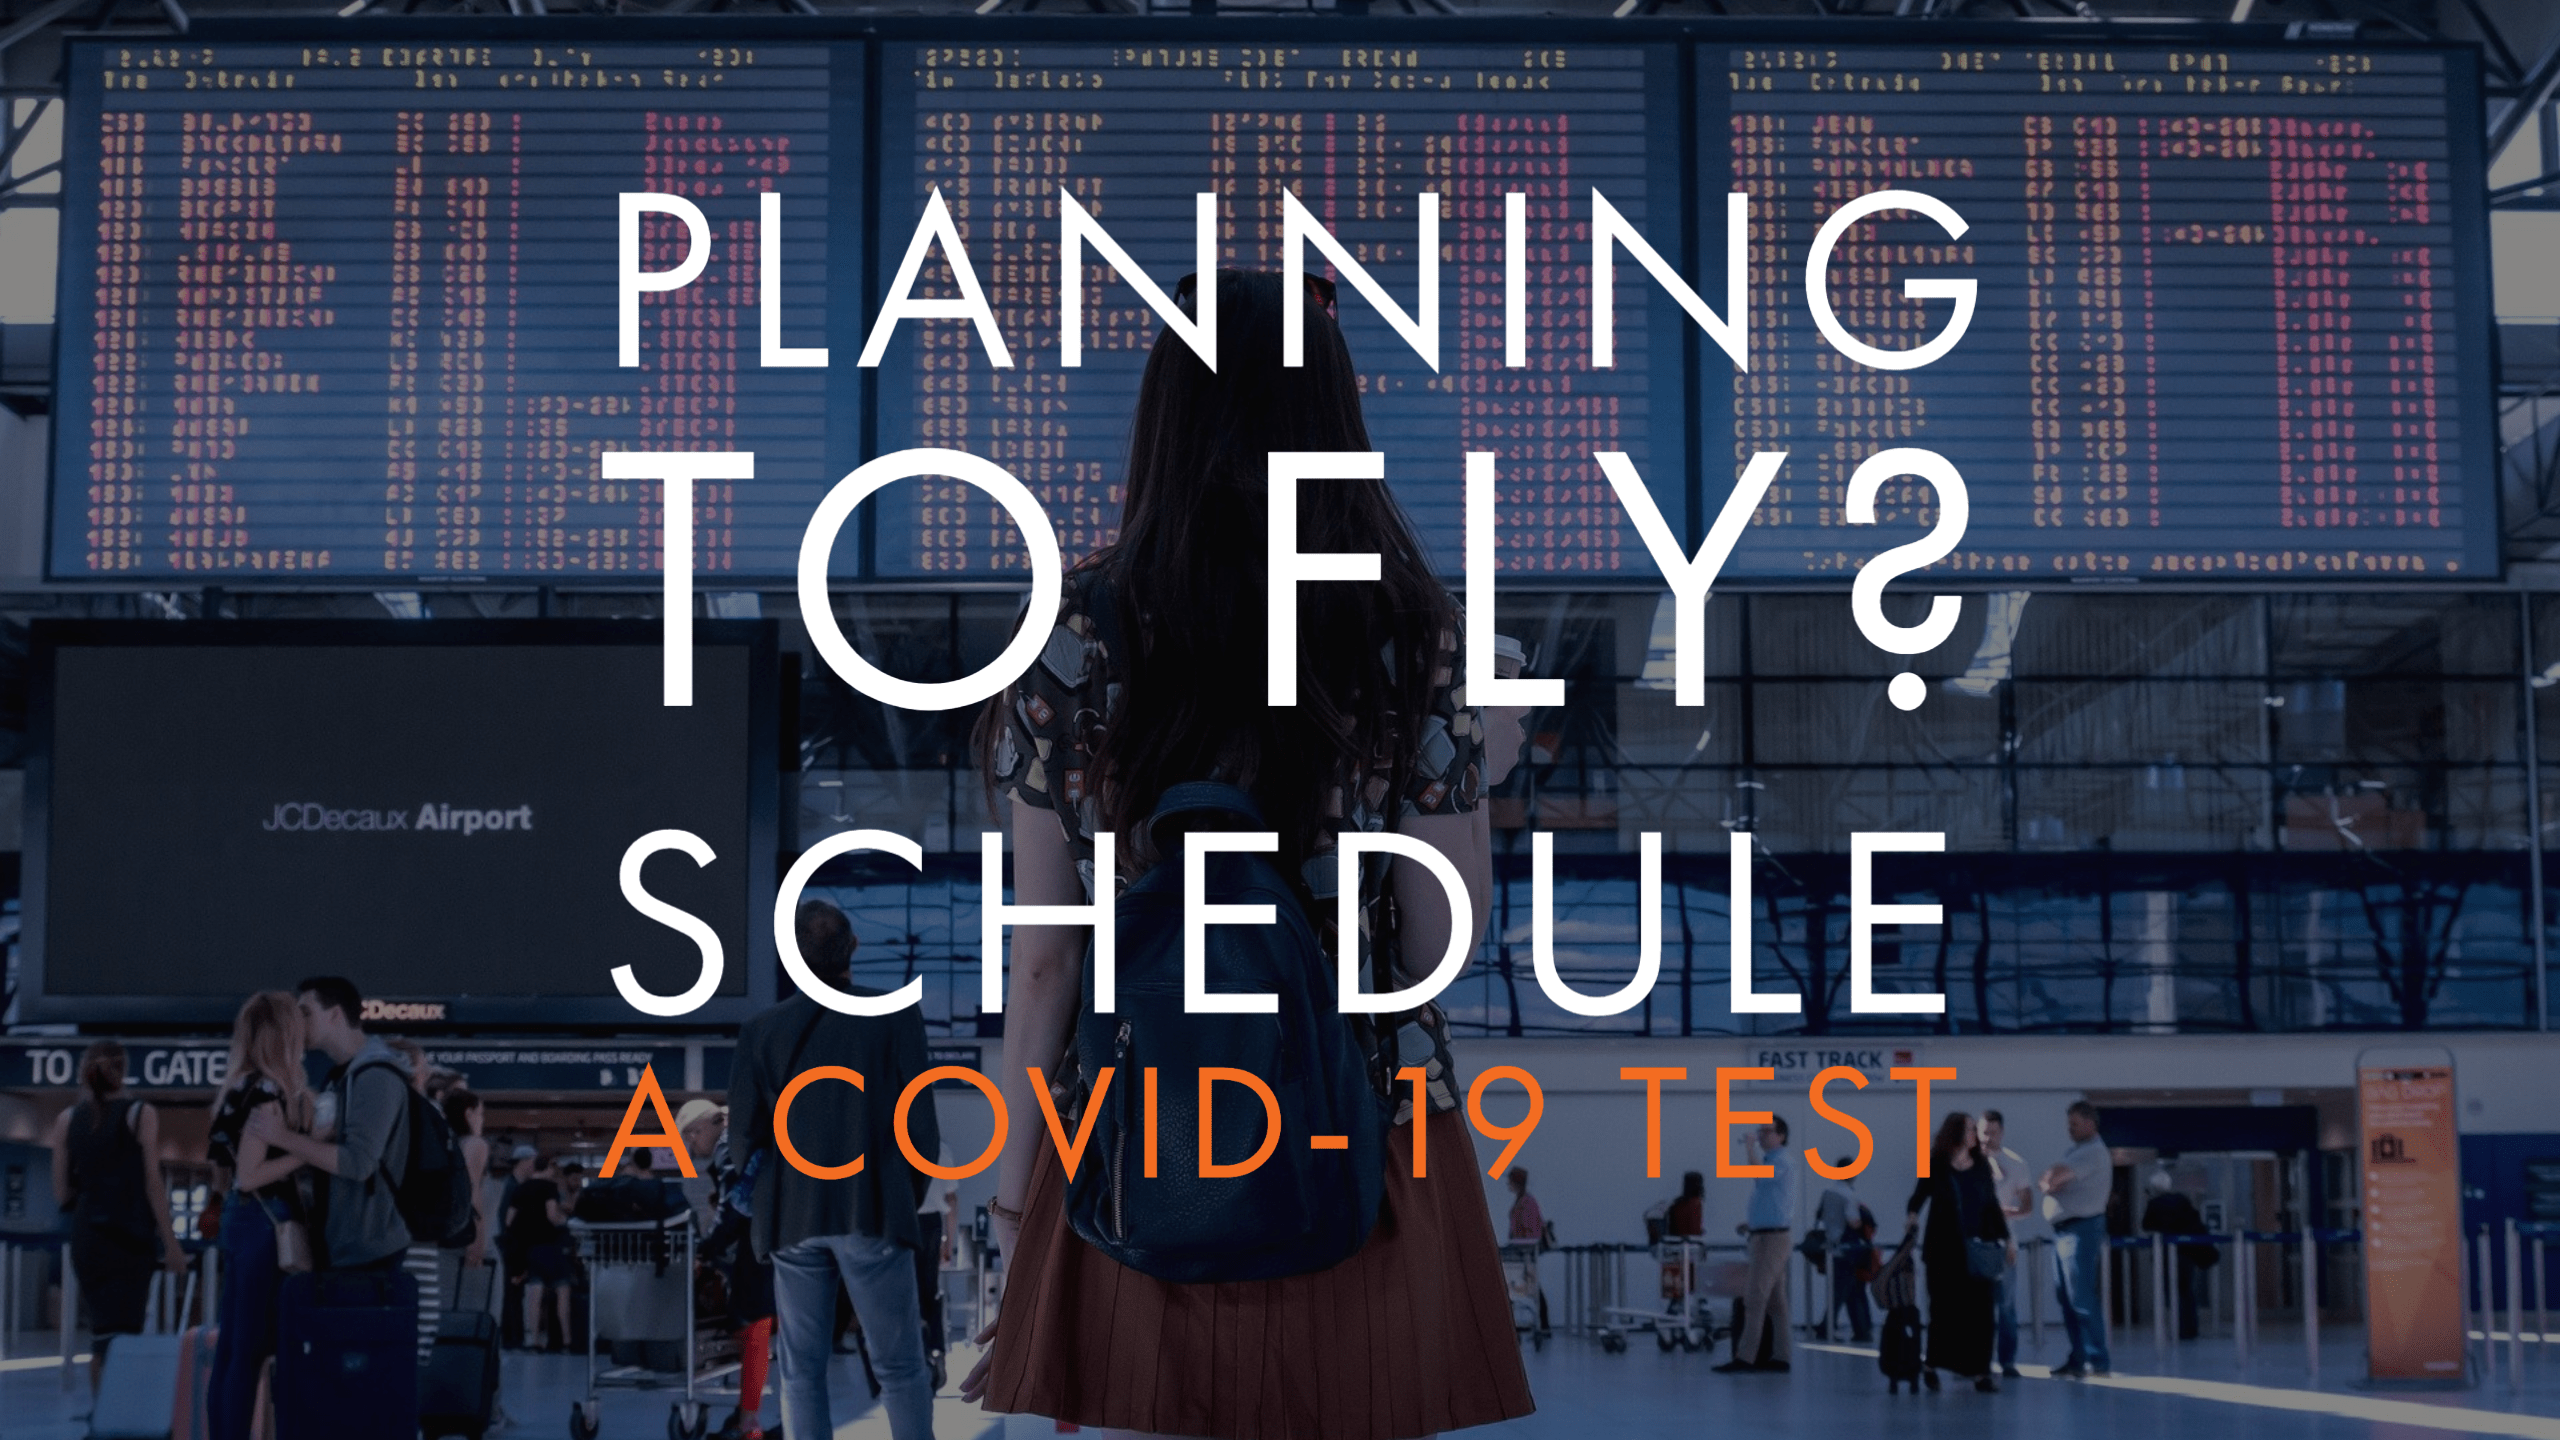 Planning to fly? Be sure to schedule a COVID Test